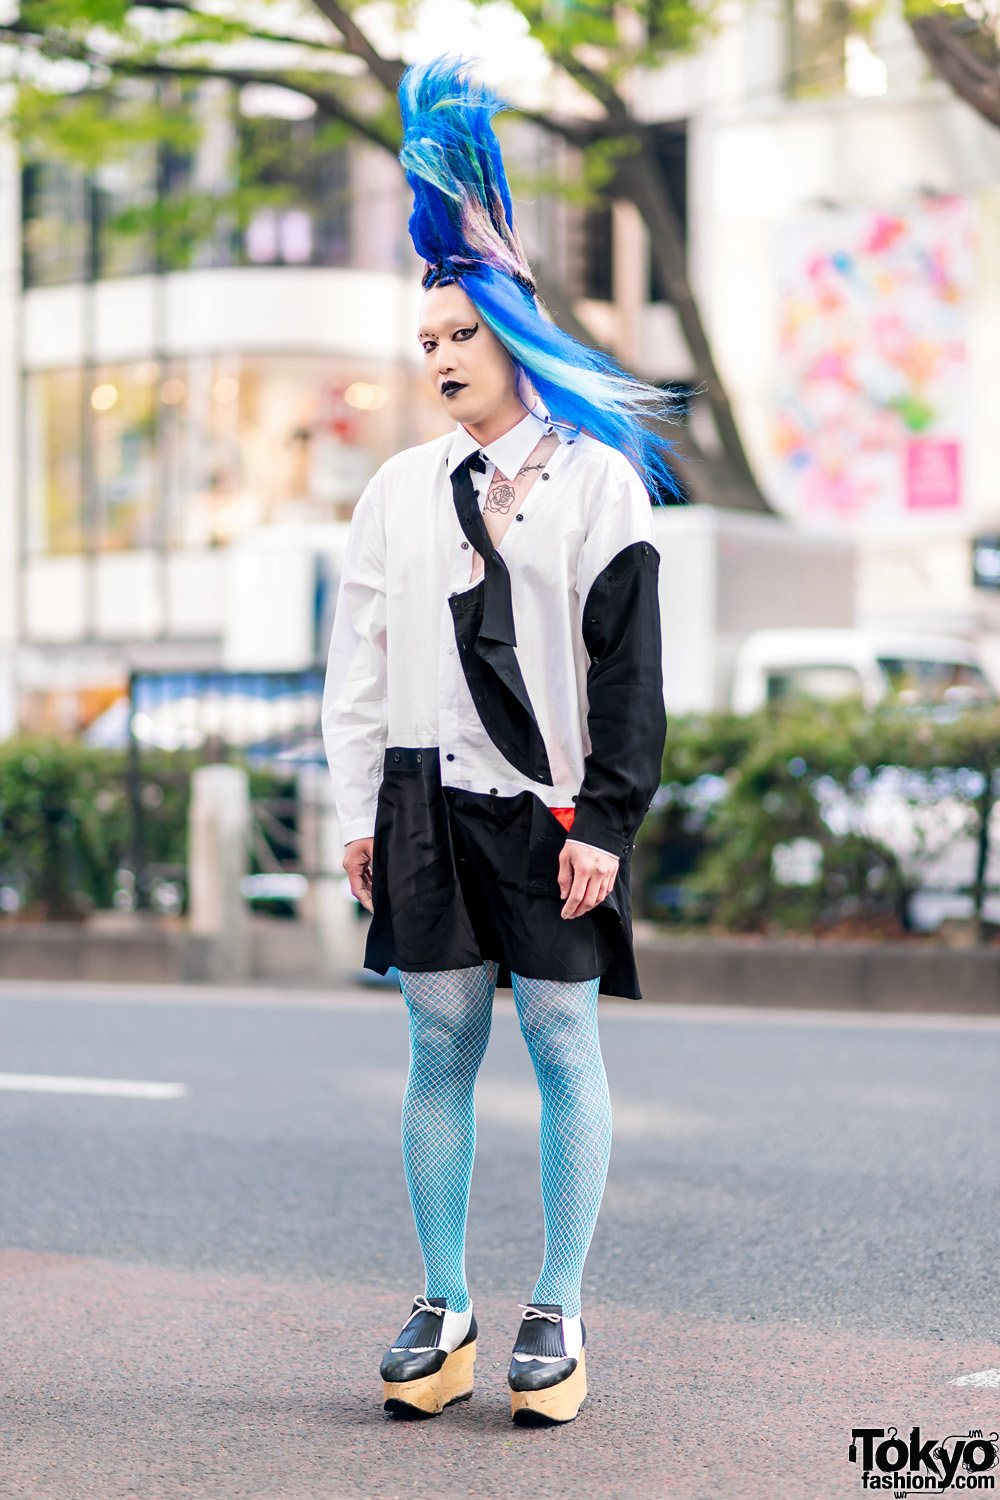 Vintage Fashion Buyer & Model in Harajuku w/ Tall Blue Hairstyle